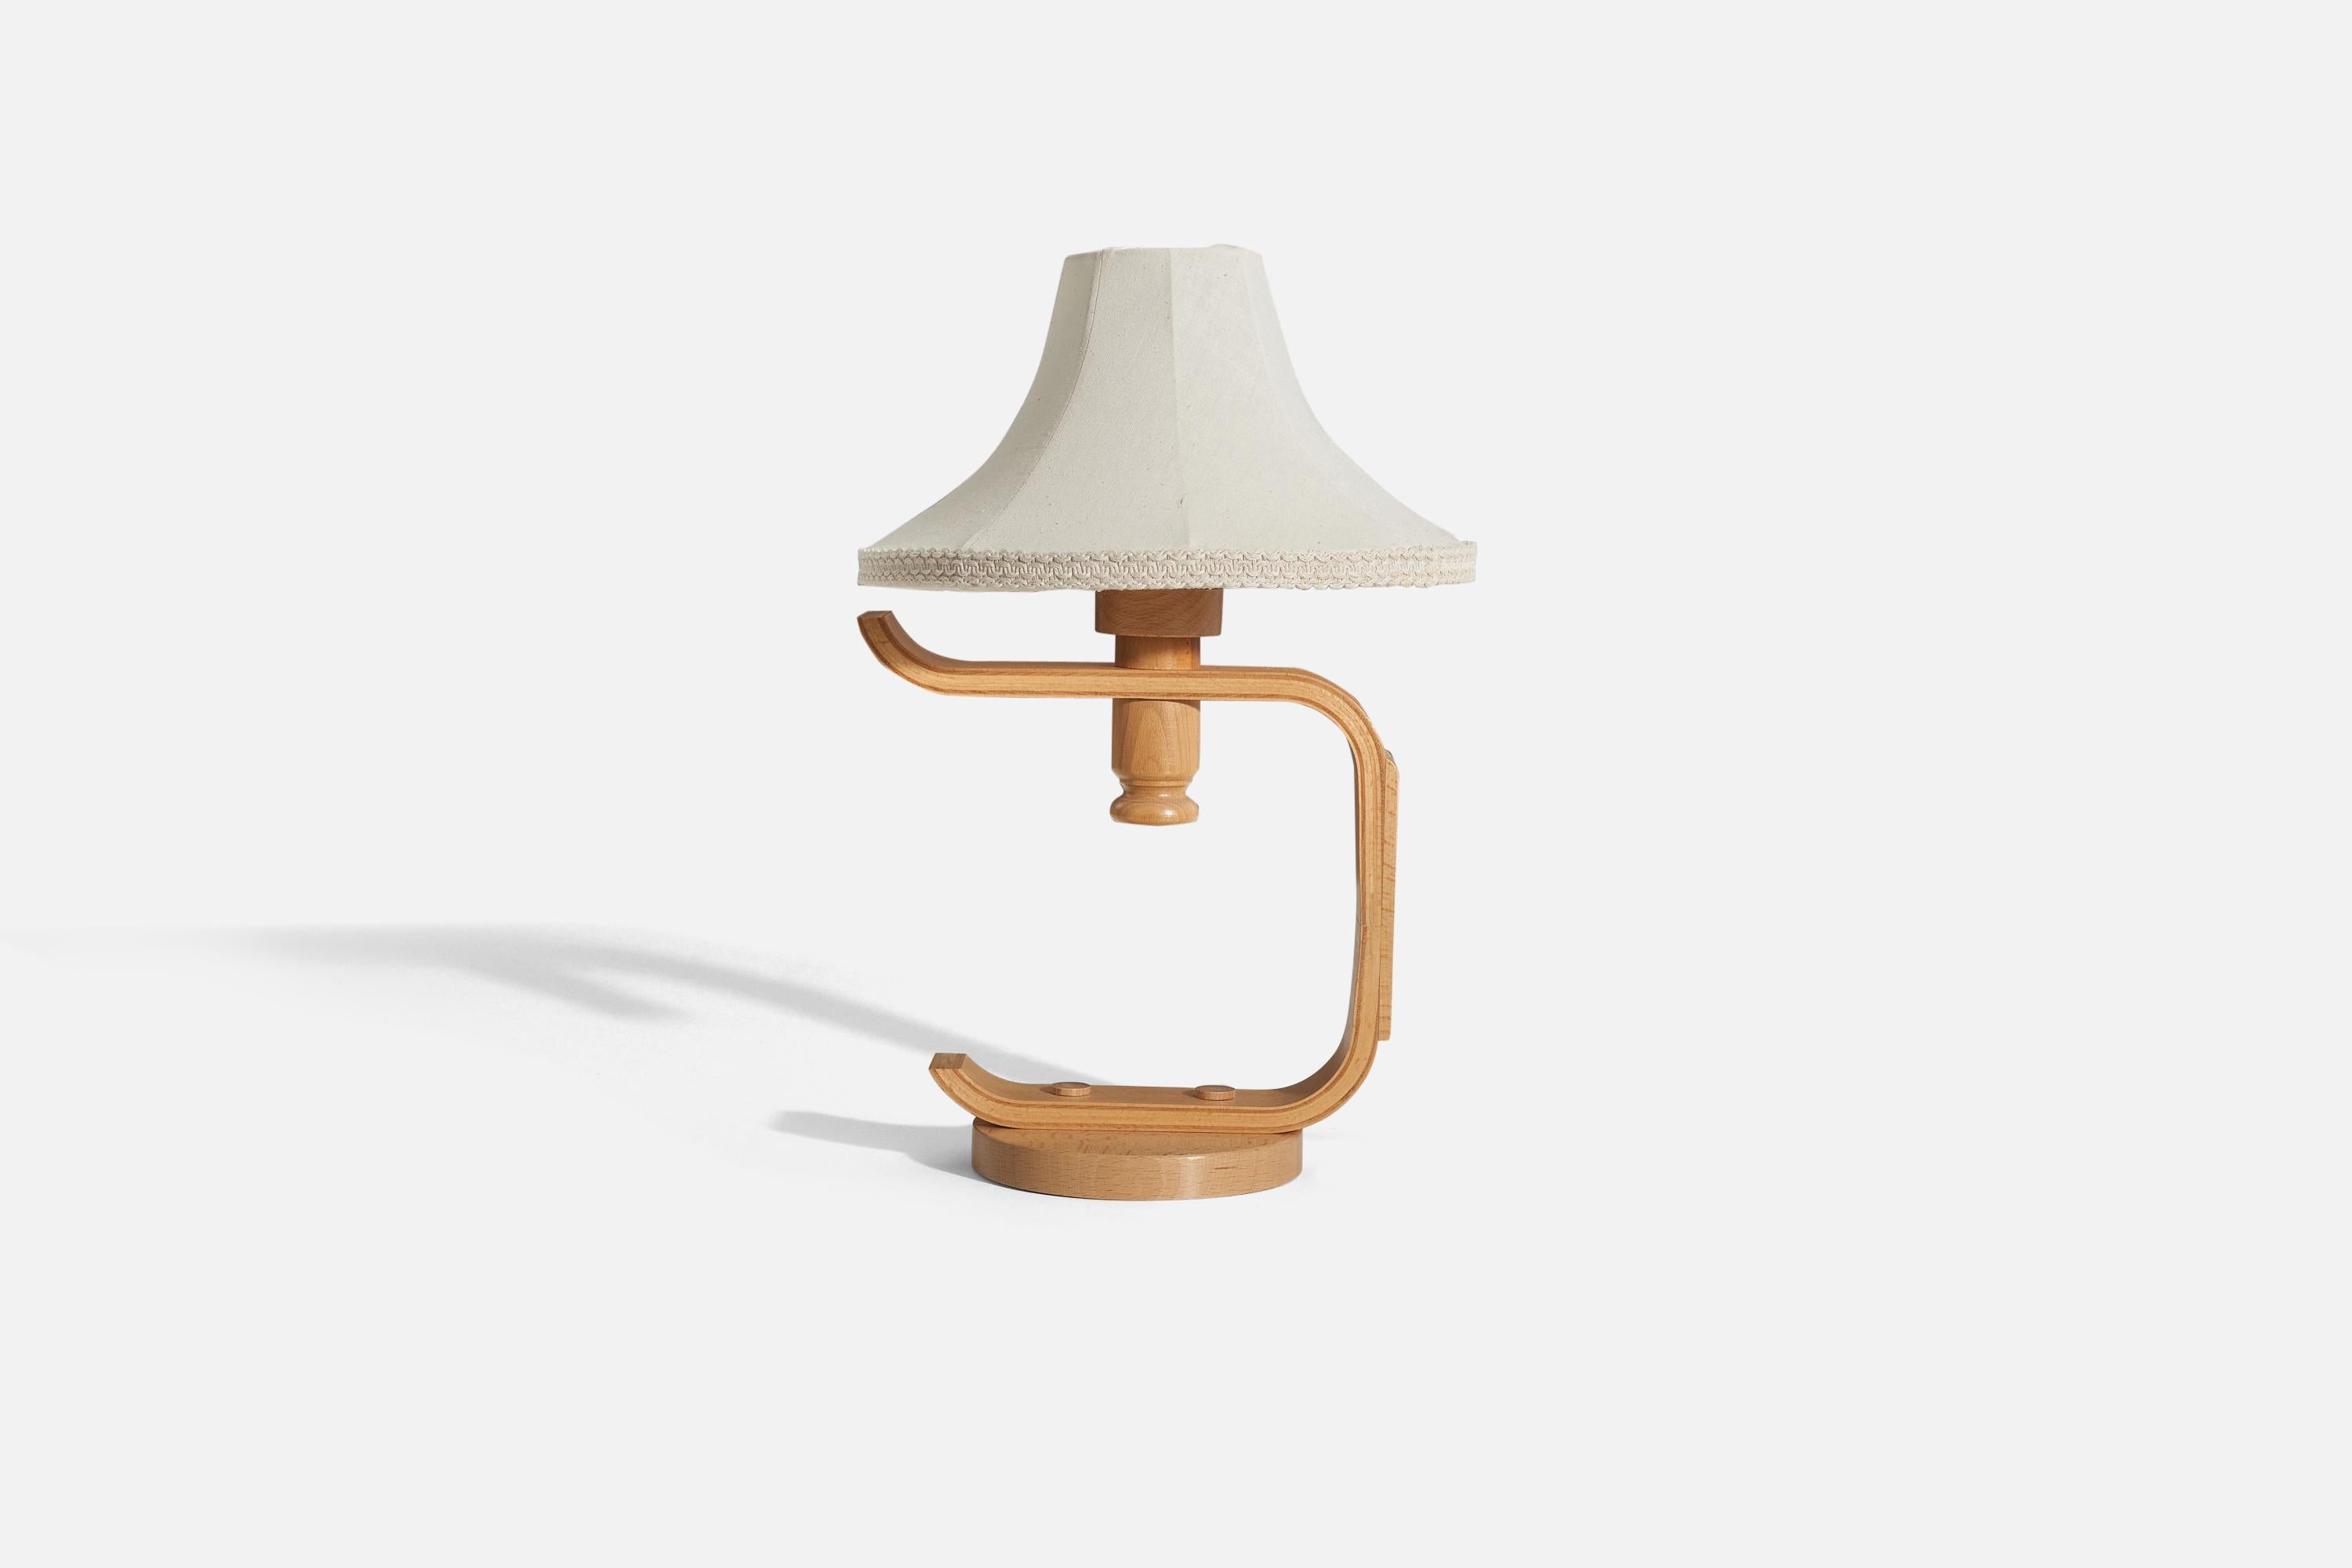 A wooden table lamp with a fabric lampshade, designed and produced by a Swedish designer, Sweden, 1970s.

Sold with lampshade. 
Dimensions of Lamp (inches) : 12.8125 x 6.125 x 9.75 (H x W x D)
Dimensions of Shade (inches) : 3.5 x 11 x 7.25 (T x B x